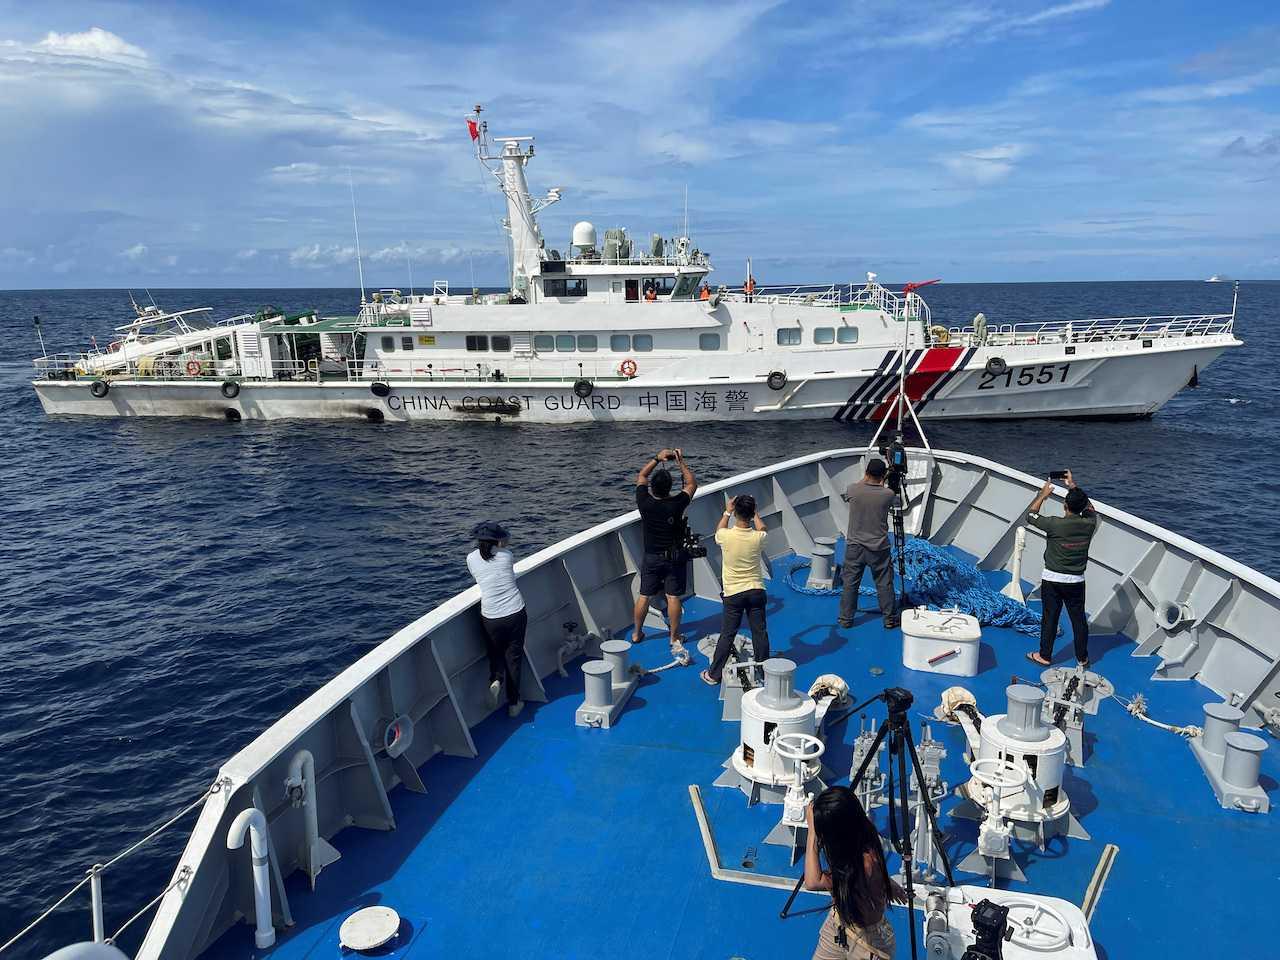 Journalists onboard a Philippines Coast Guard ship take photos of a China Coast Guard vessel, during a resupply mission for troops stationed at a grounded Philippines ship, in the South China Sea, Sept 8. Photo: Reuters